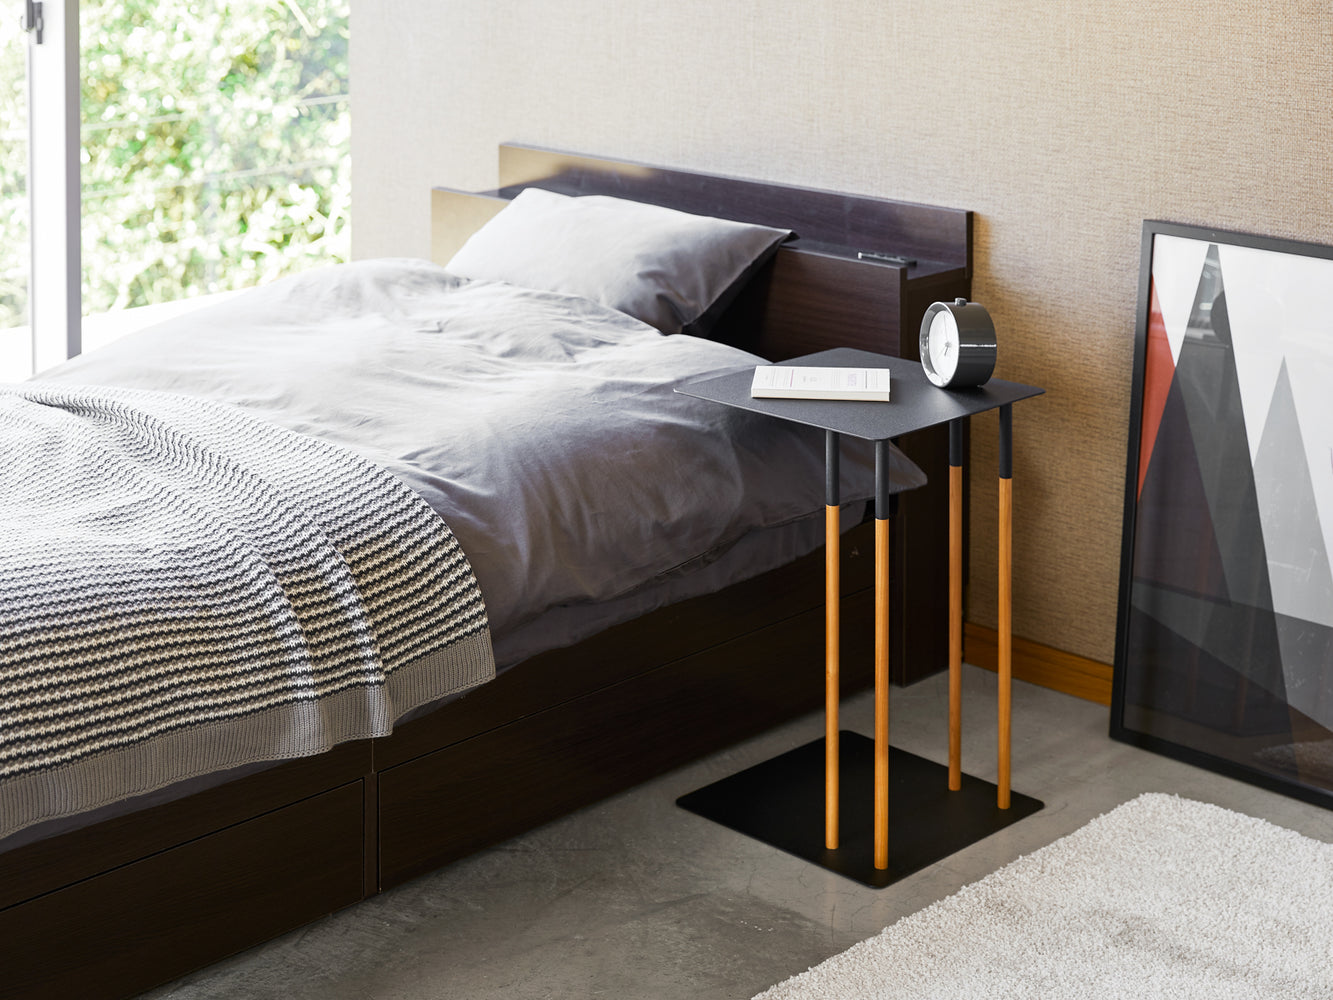 View 7 - Black C Side Table displaying book and clock in bedroom by Yamazaki Home.